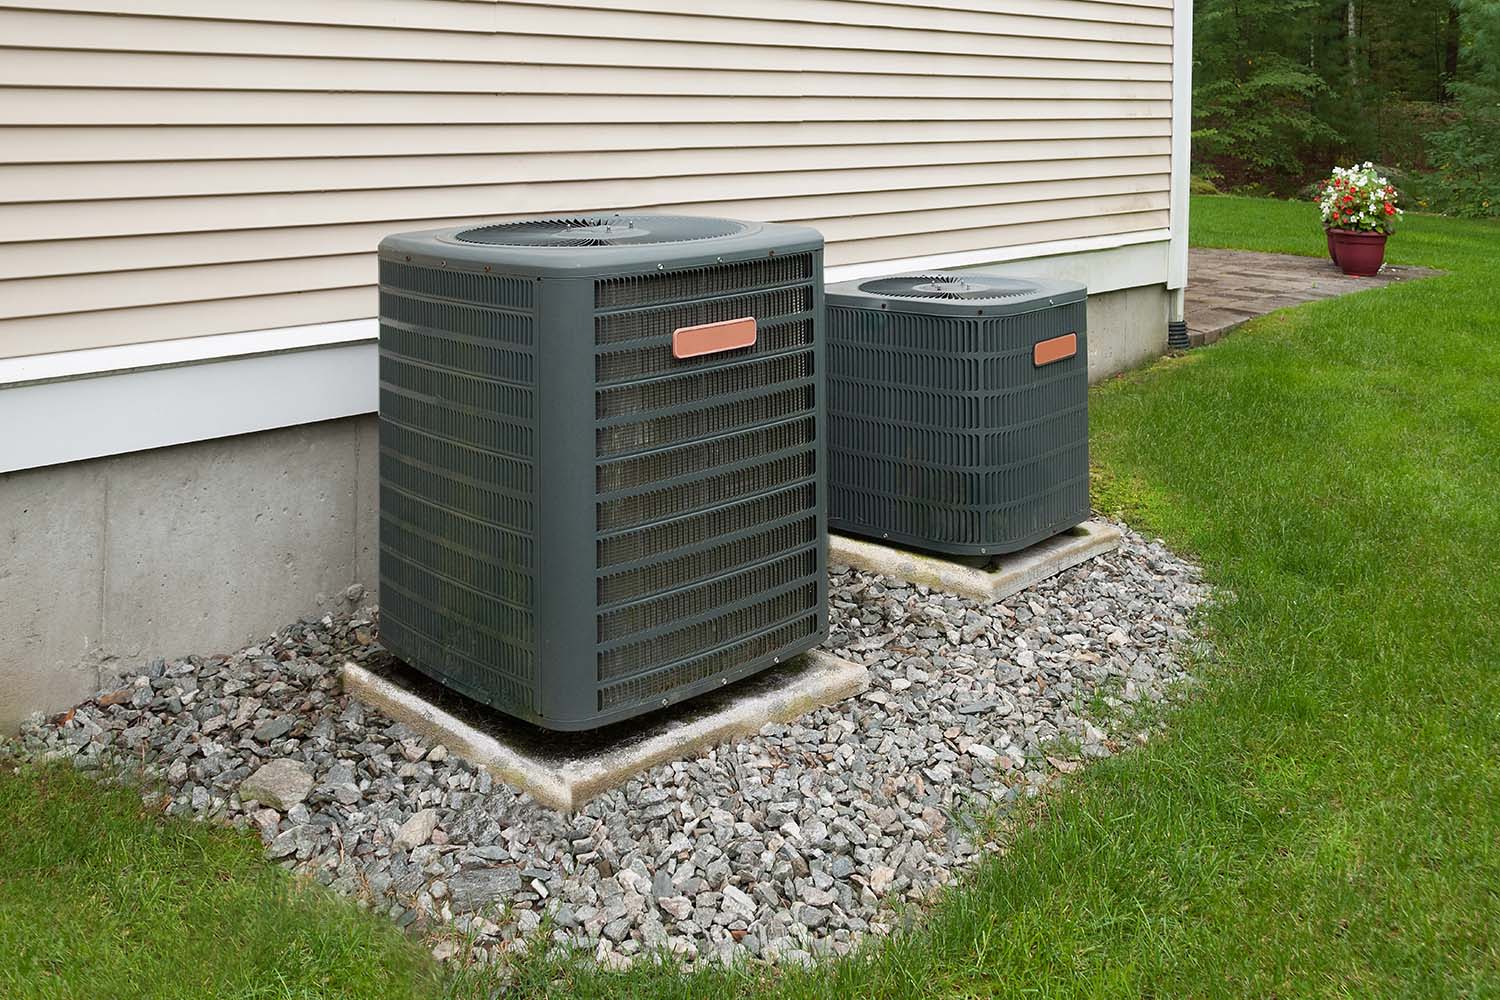 Outdoor AC units that need to be prepared for summer use.